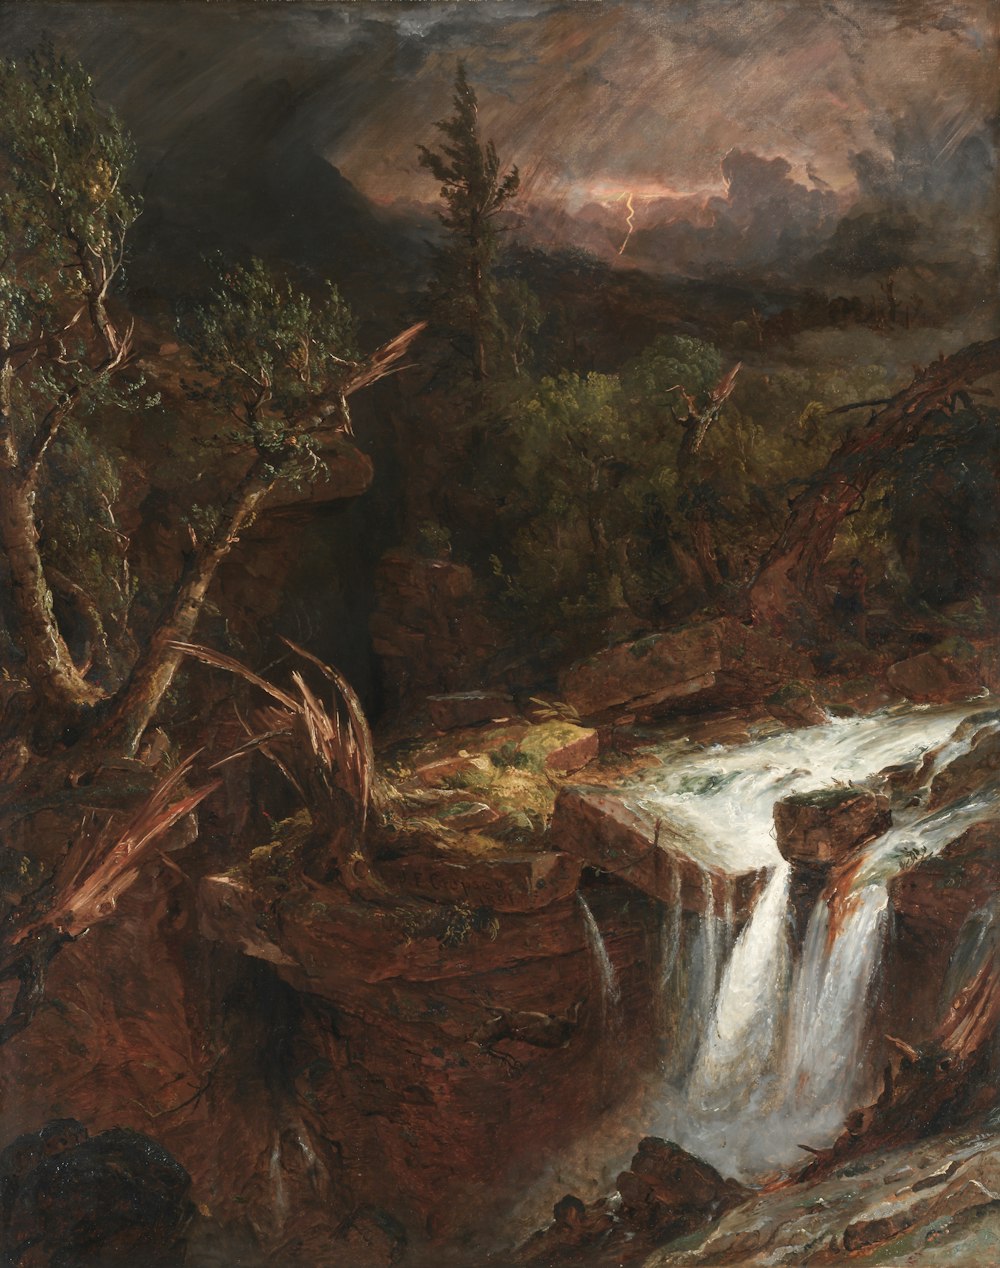 a painting of a waterfall in a rocky landscape